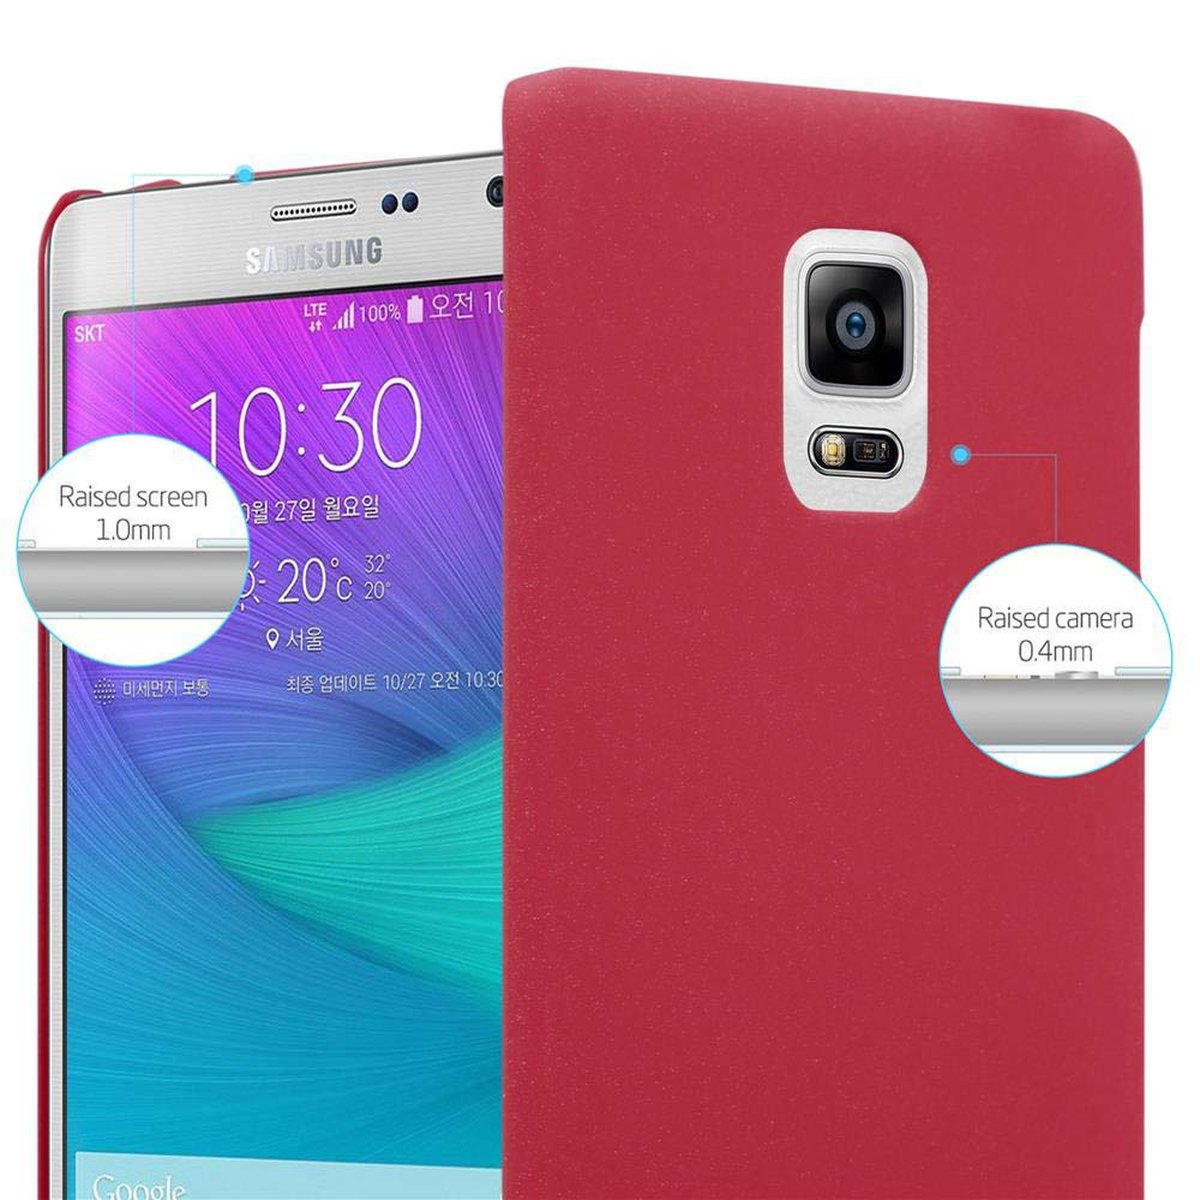 Backcover, Style, FROSTY Hard ROT Galaxy EDGE, Hülle NOTE Frosty CADORABO im Samsung, Case